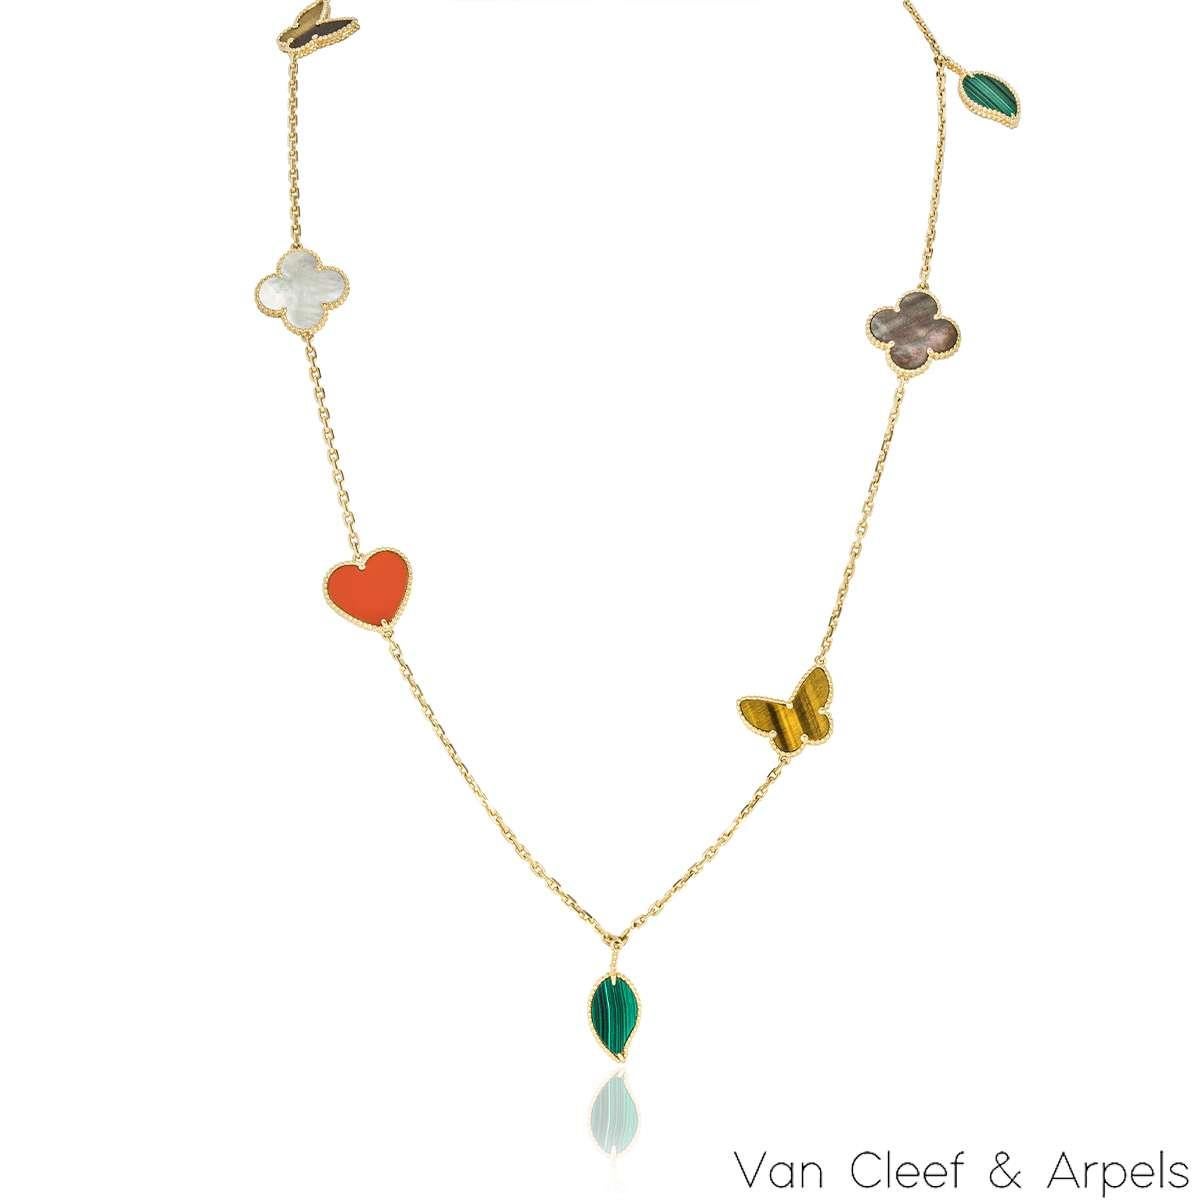 A beautiful 18k yellow gold, Lucky Alhambra long necklace by Van Cleef & Arpels. Features 12 motifs, with an array of motifs including hearts, butterflies, leaves and the iconic clovers. The motifs are set with carnelian, malachite, mother of pearl